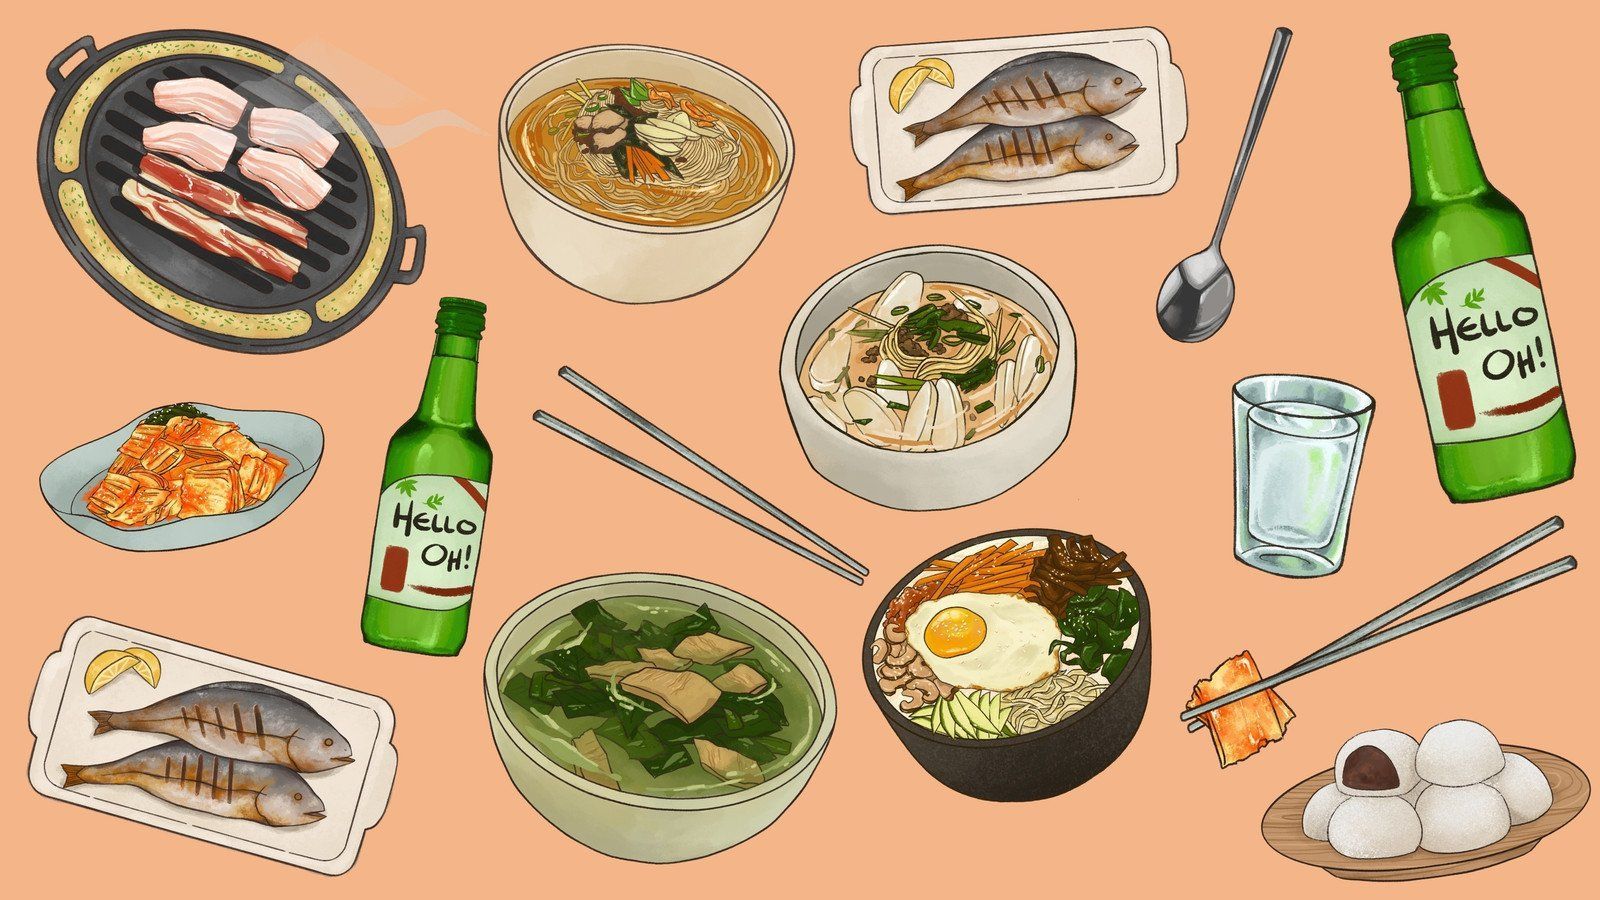 An illustration of various Korean dishes and drinks. - Food, Korean, hand drawn